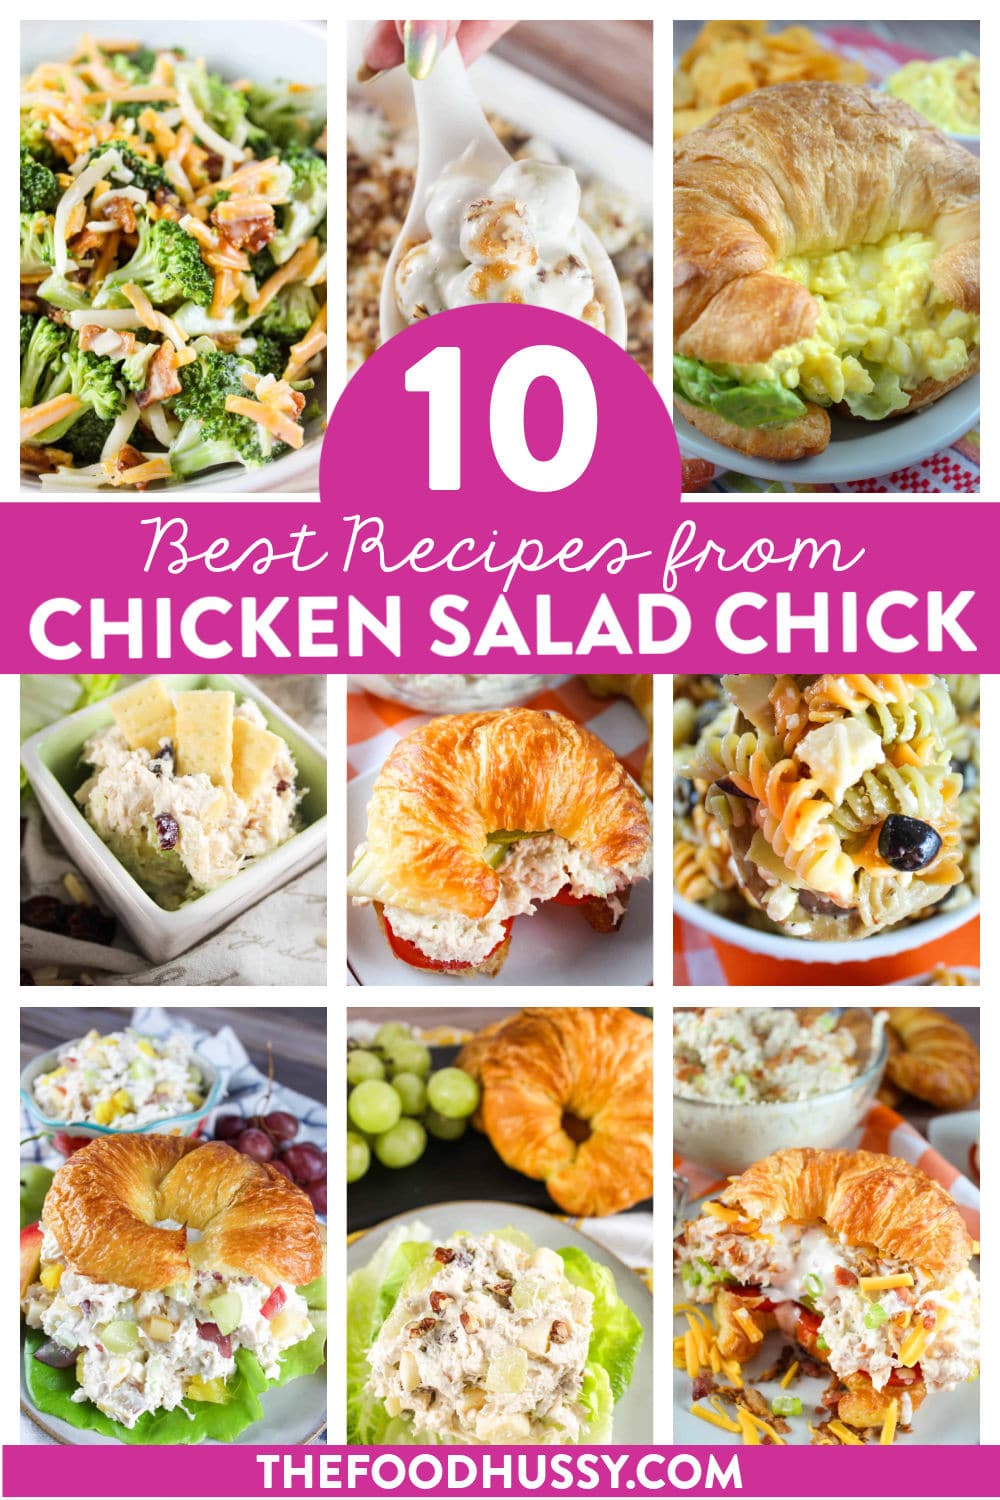 Here you'll find all the Best Chicken Salad Chick Recipes! They are one of my favorite "fast-casual" chains because the food is fresh and delicious. You'll find copycat recipes for their most famous Chicken Salads like the Classic Carol and the Sassy Scotty as well as their side dishes like the Broccoli Salad and Grape Salad!  via @foodhussy